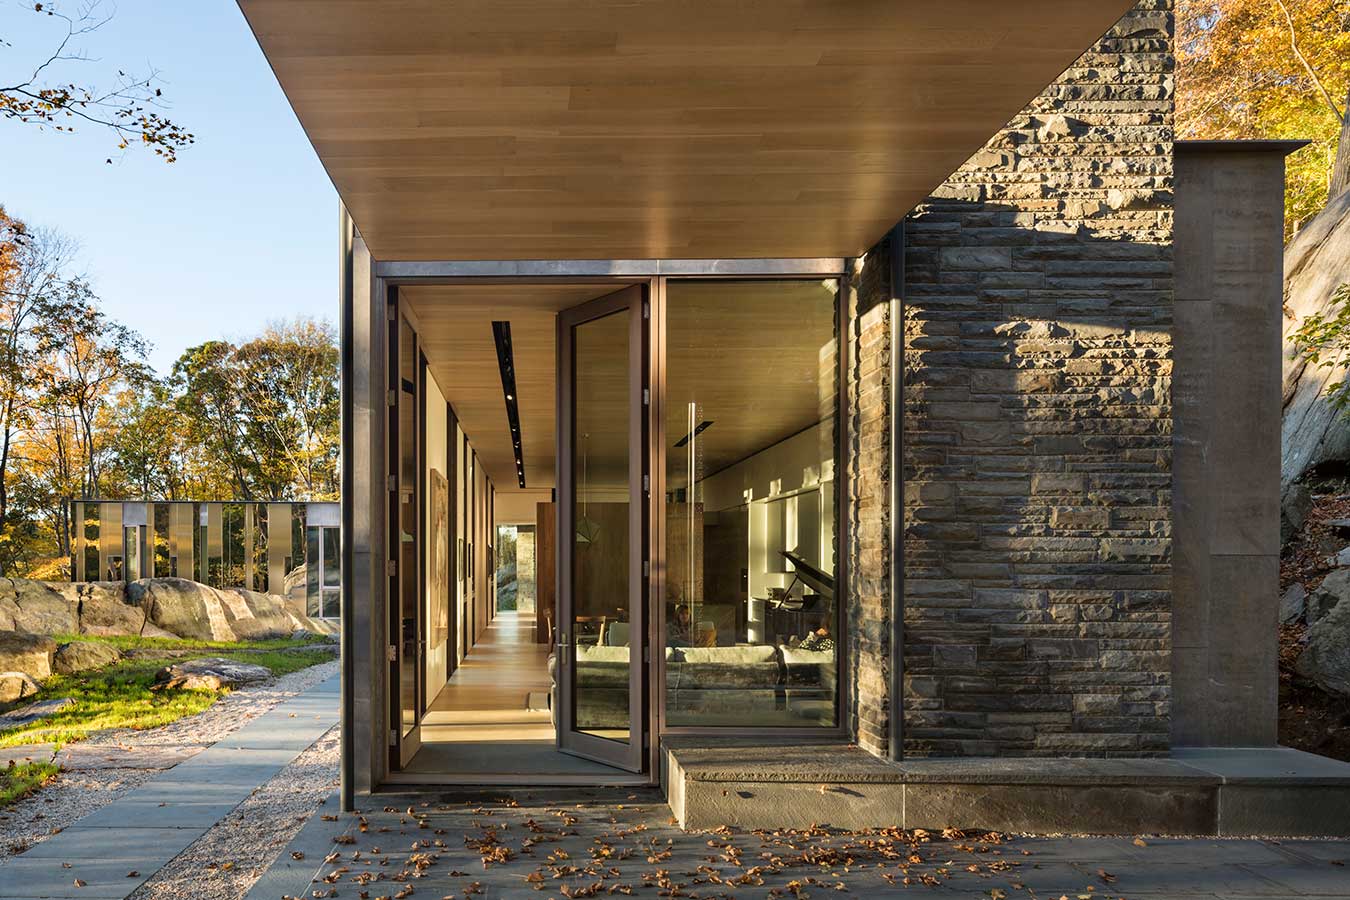 <p>At the end of the living/dining space, a canopy continues the space out over a stone patio that extends the interior out into the landscape along the steep ridge line as it rides out beyond the house to the southeast. <br><small>&copy; Peter Aaron</small></p>